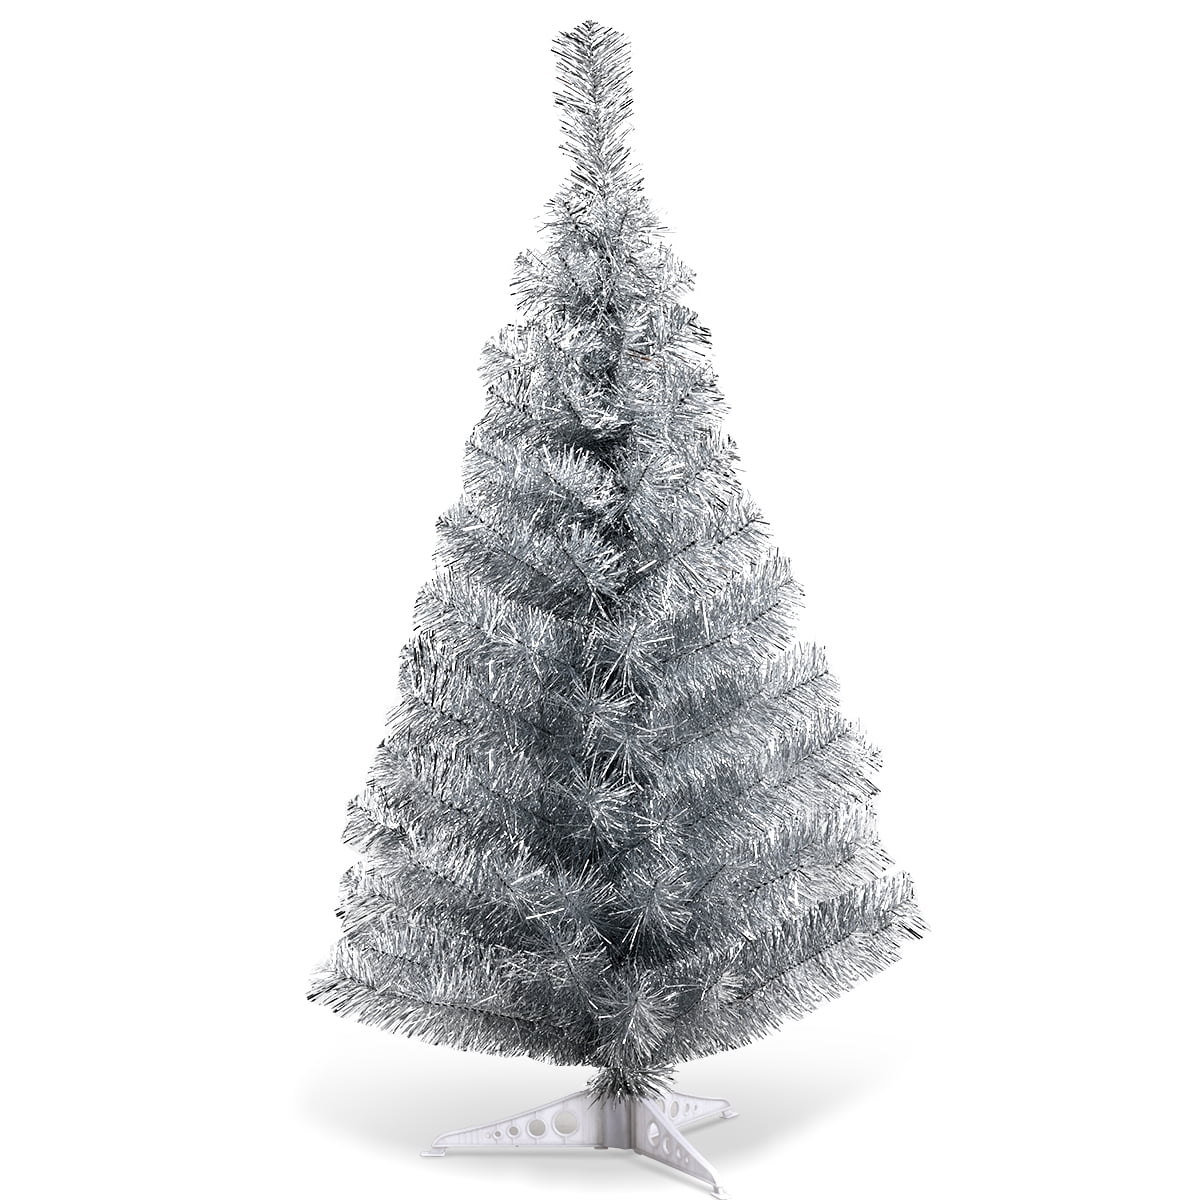 SILVER TINSEL EVERGREEN WHITE FIBER OPTIC CHRISTMAS TREE YOUR CHOICE! 